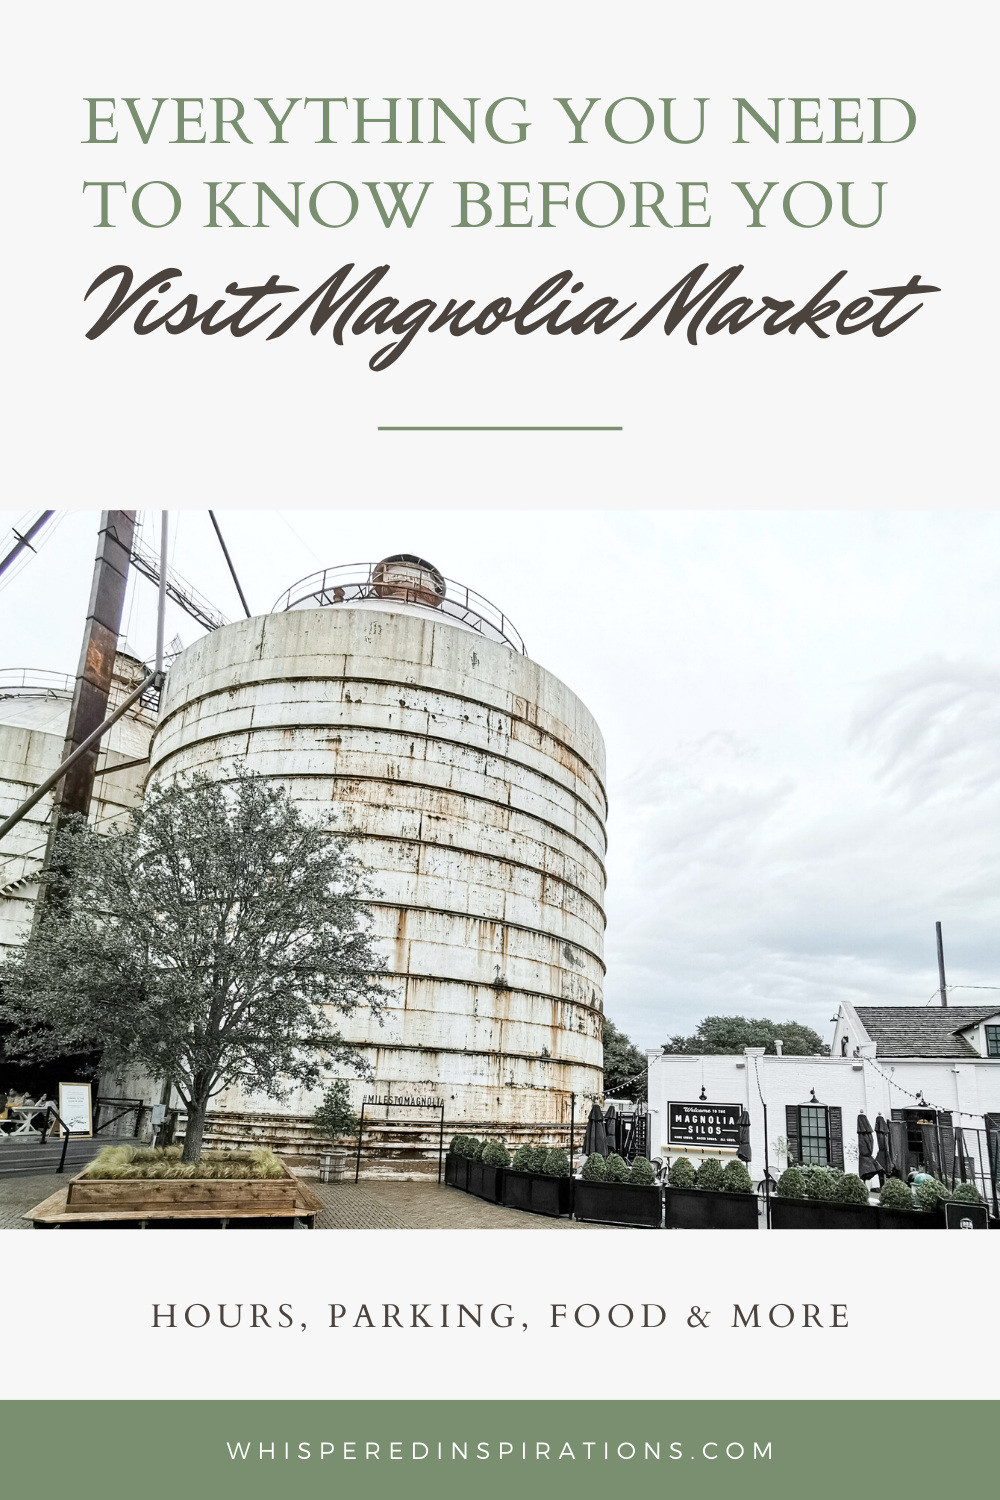 A picture of the Silos at Magnolia Market. A banner reads, "Everything You Need to Know Before Visiting Magnolia Market."